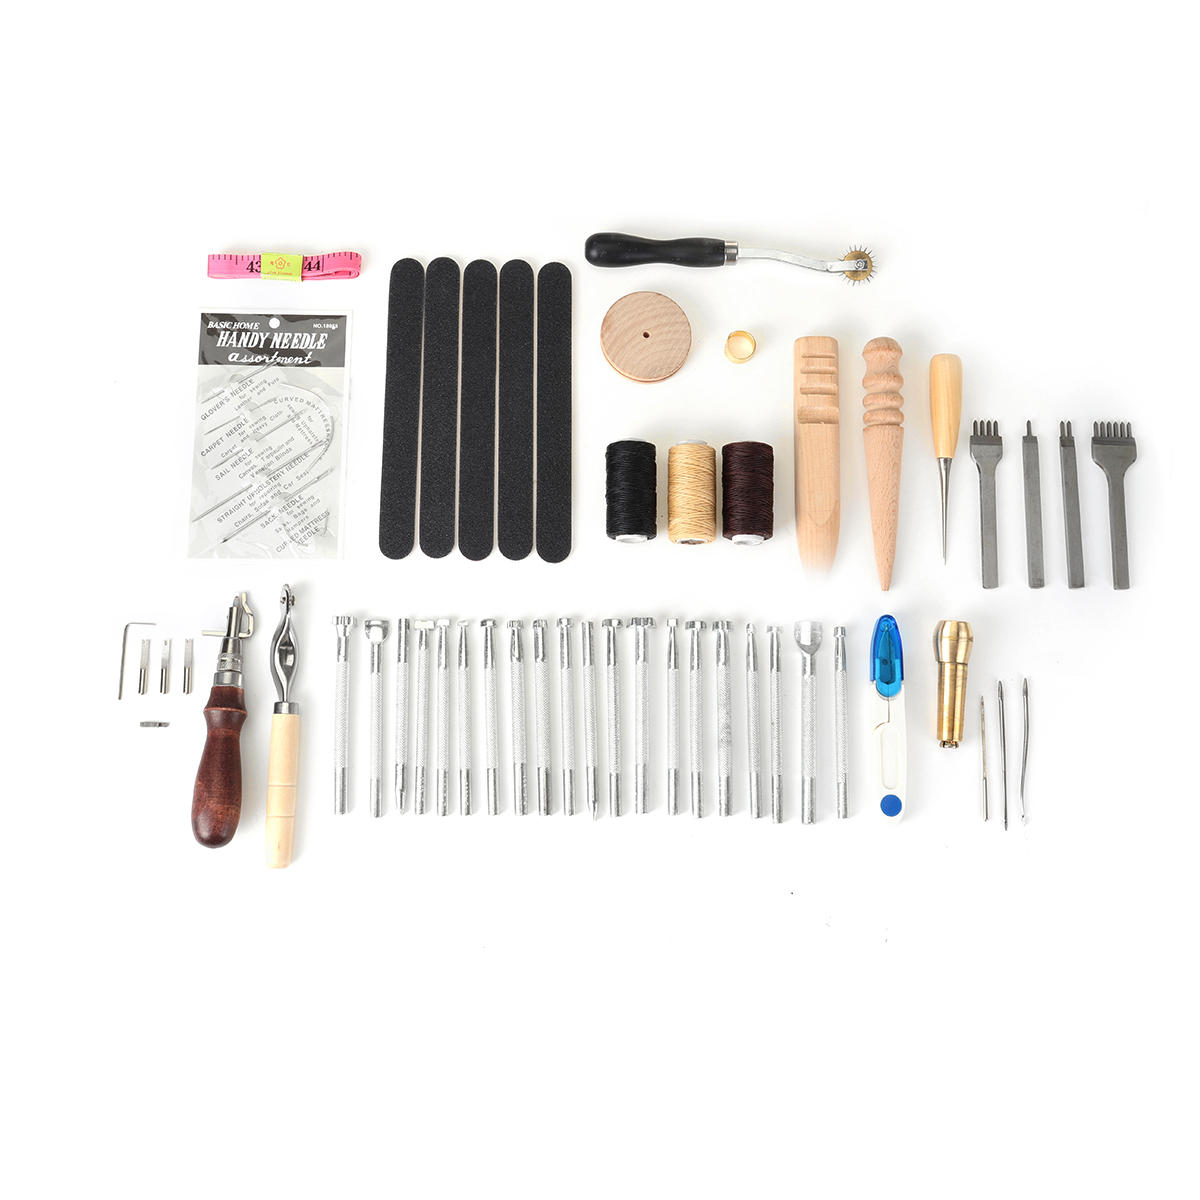 50PCS Leather Craft Tools Kit Hand DIY Sewing Stitching Carving Work Punch Saddle for Leather Working